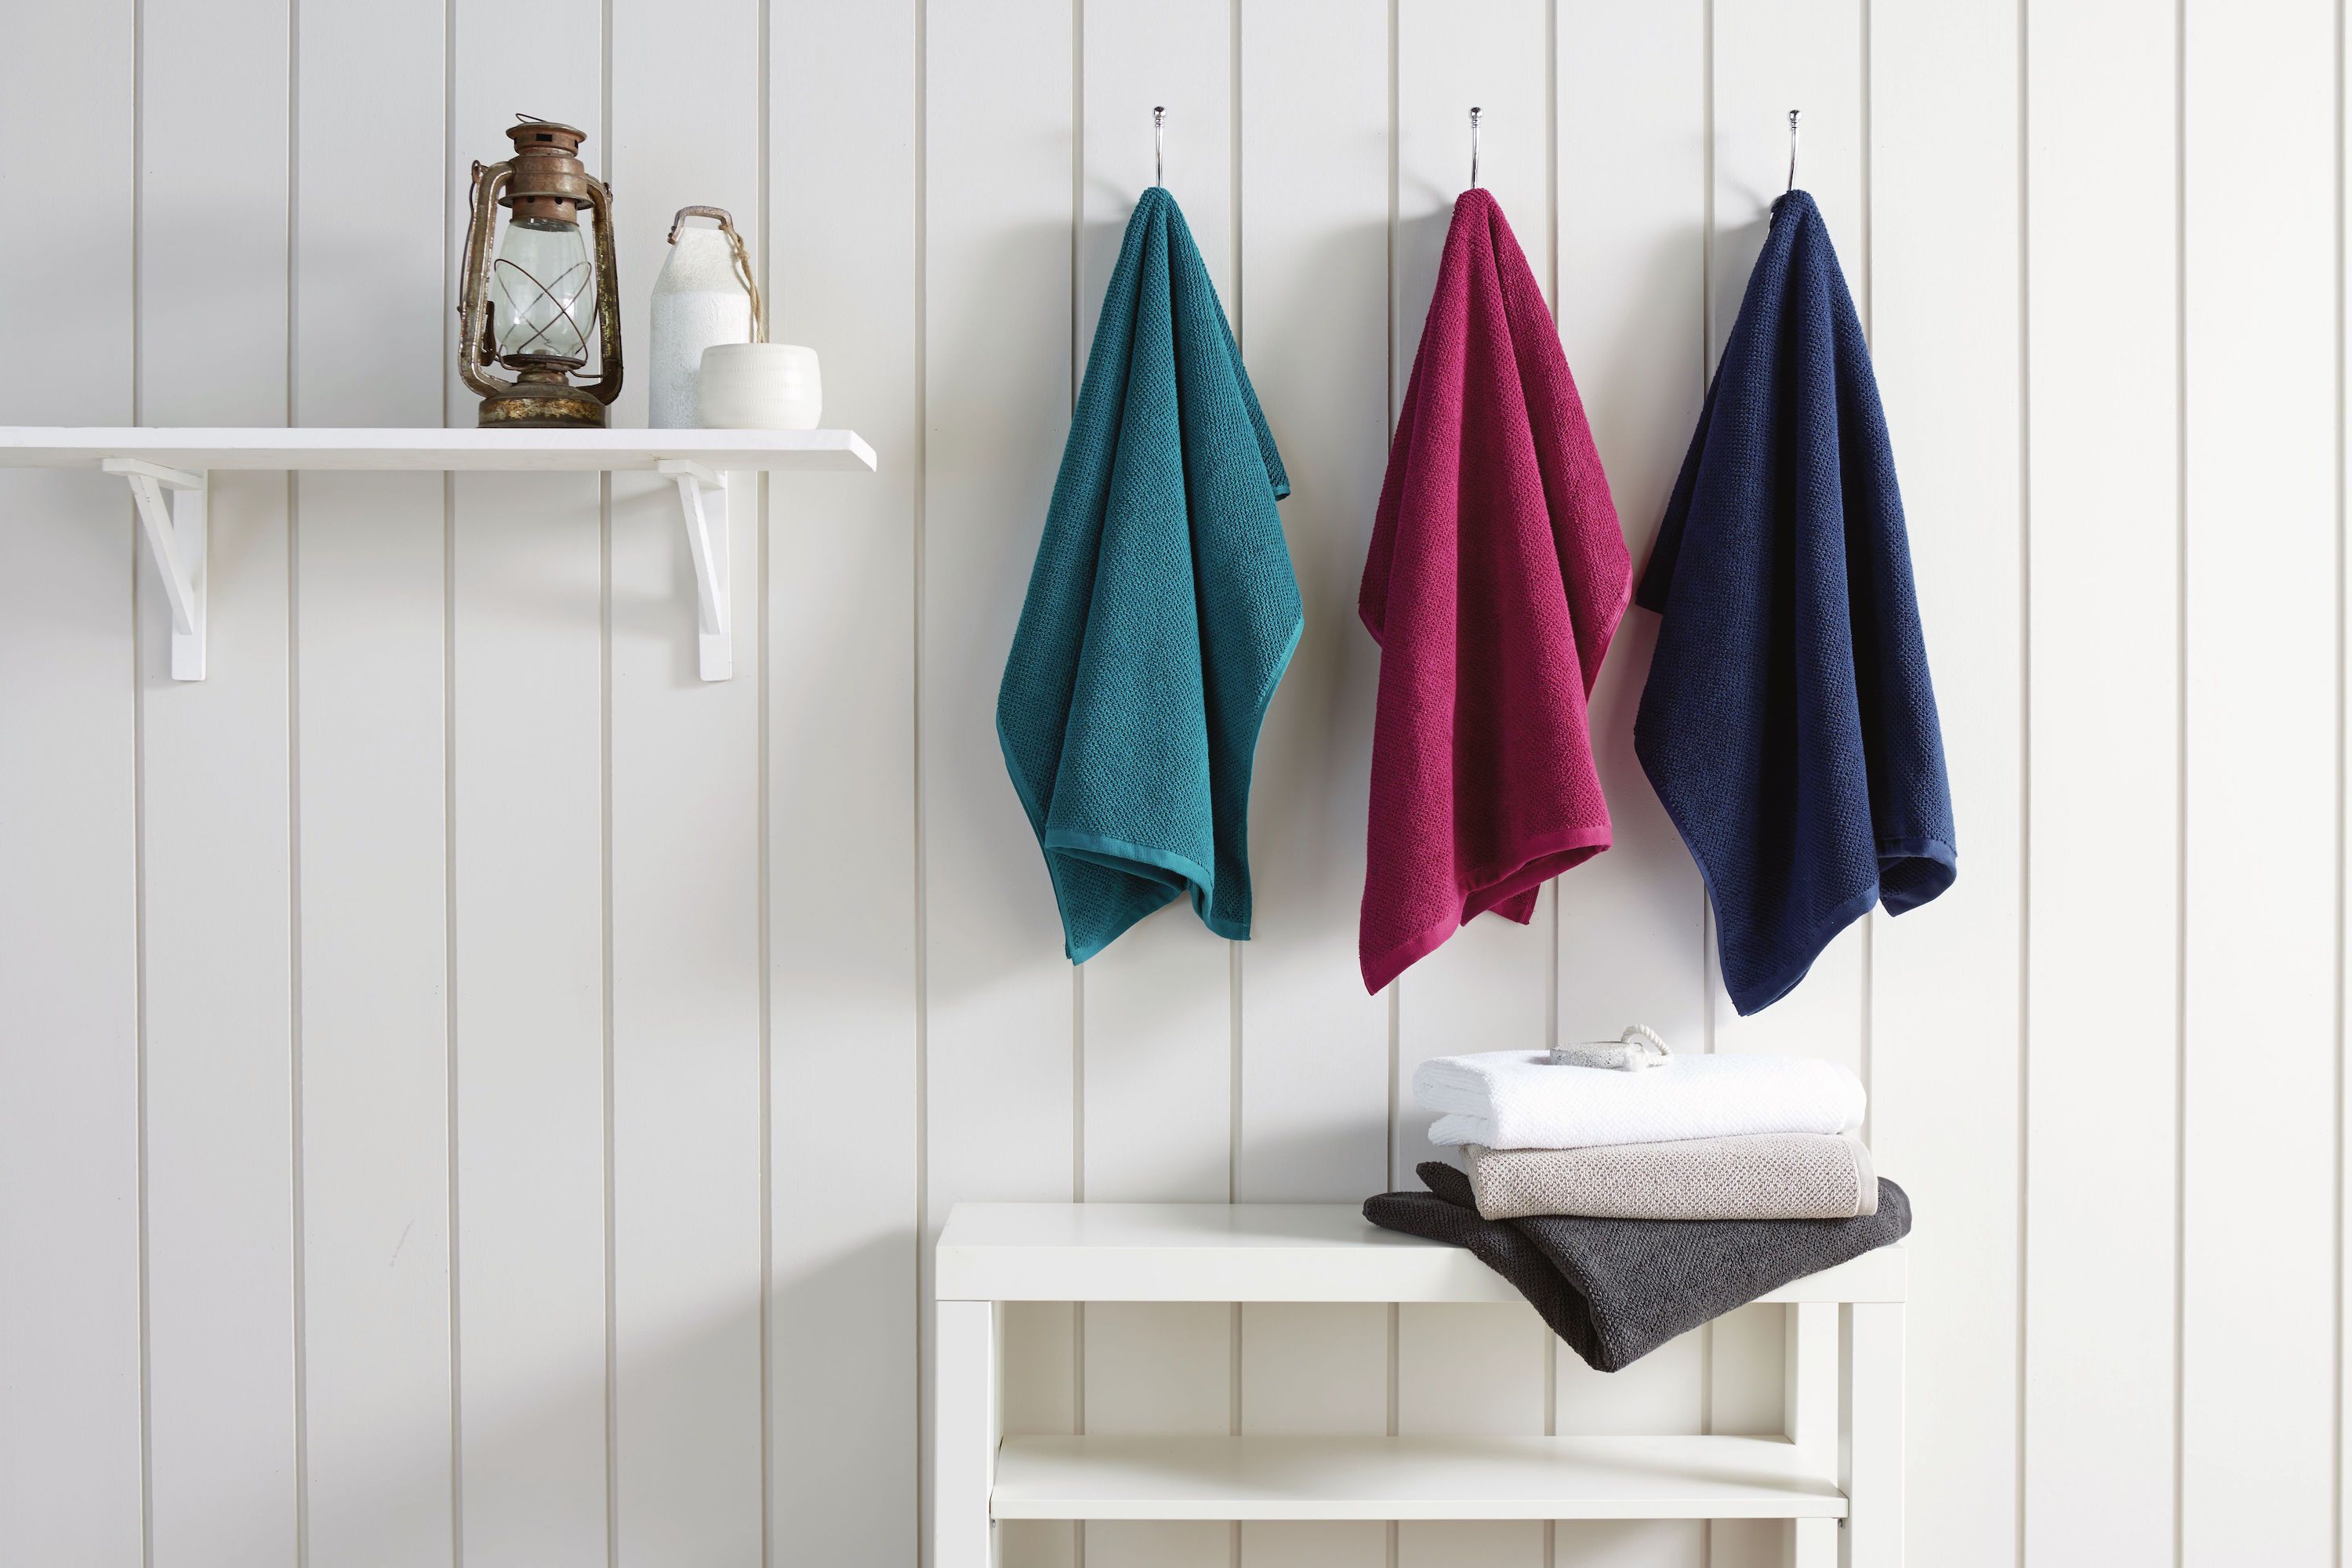 How to keep your towels soft: easy tips for perfect results every time 